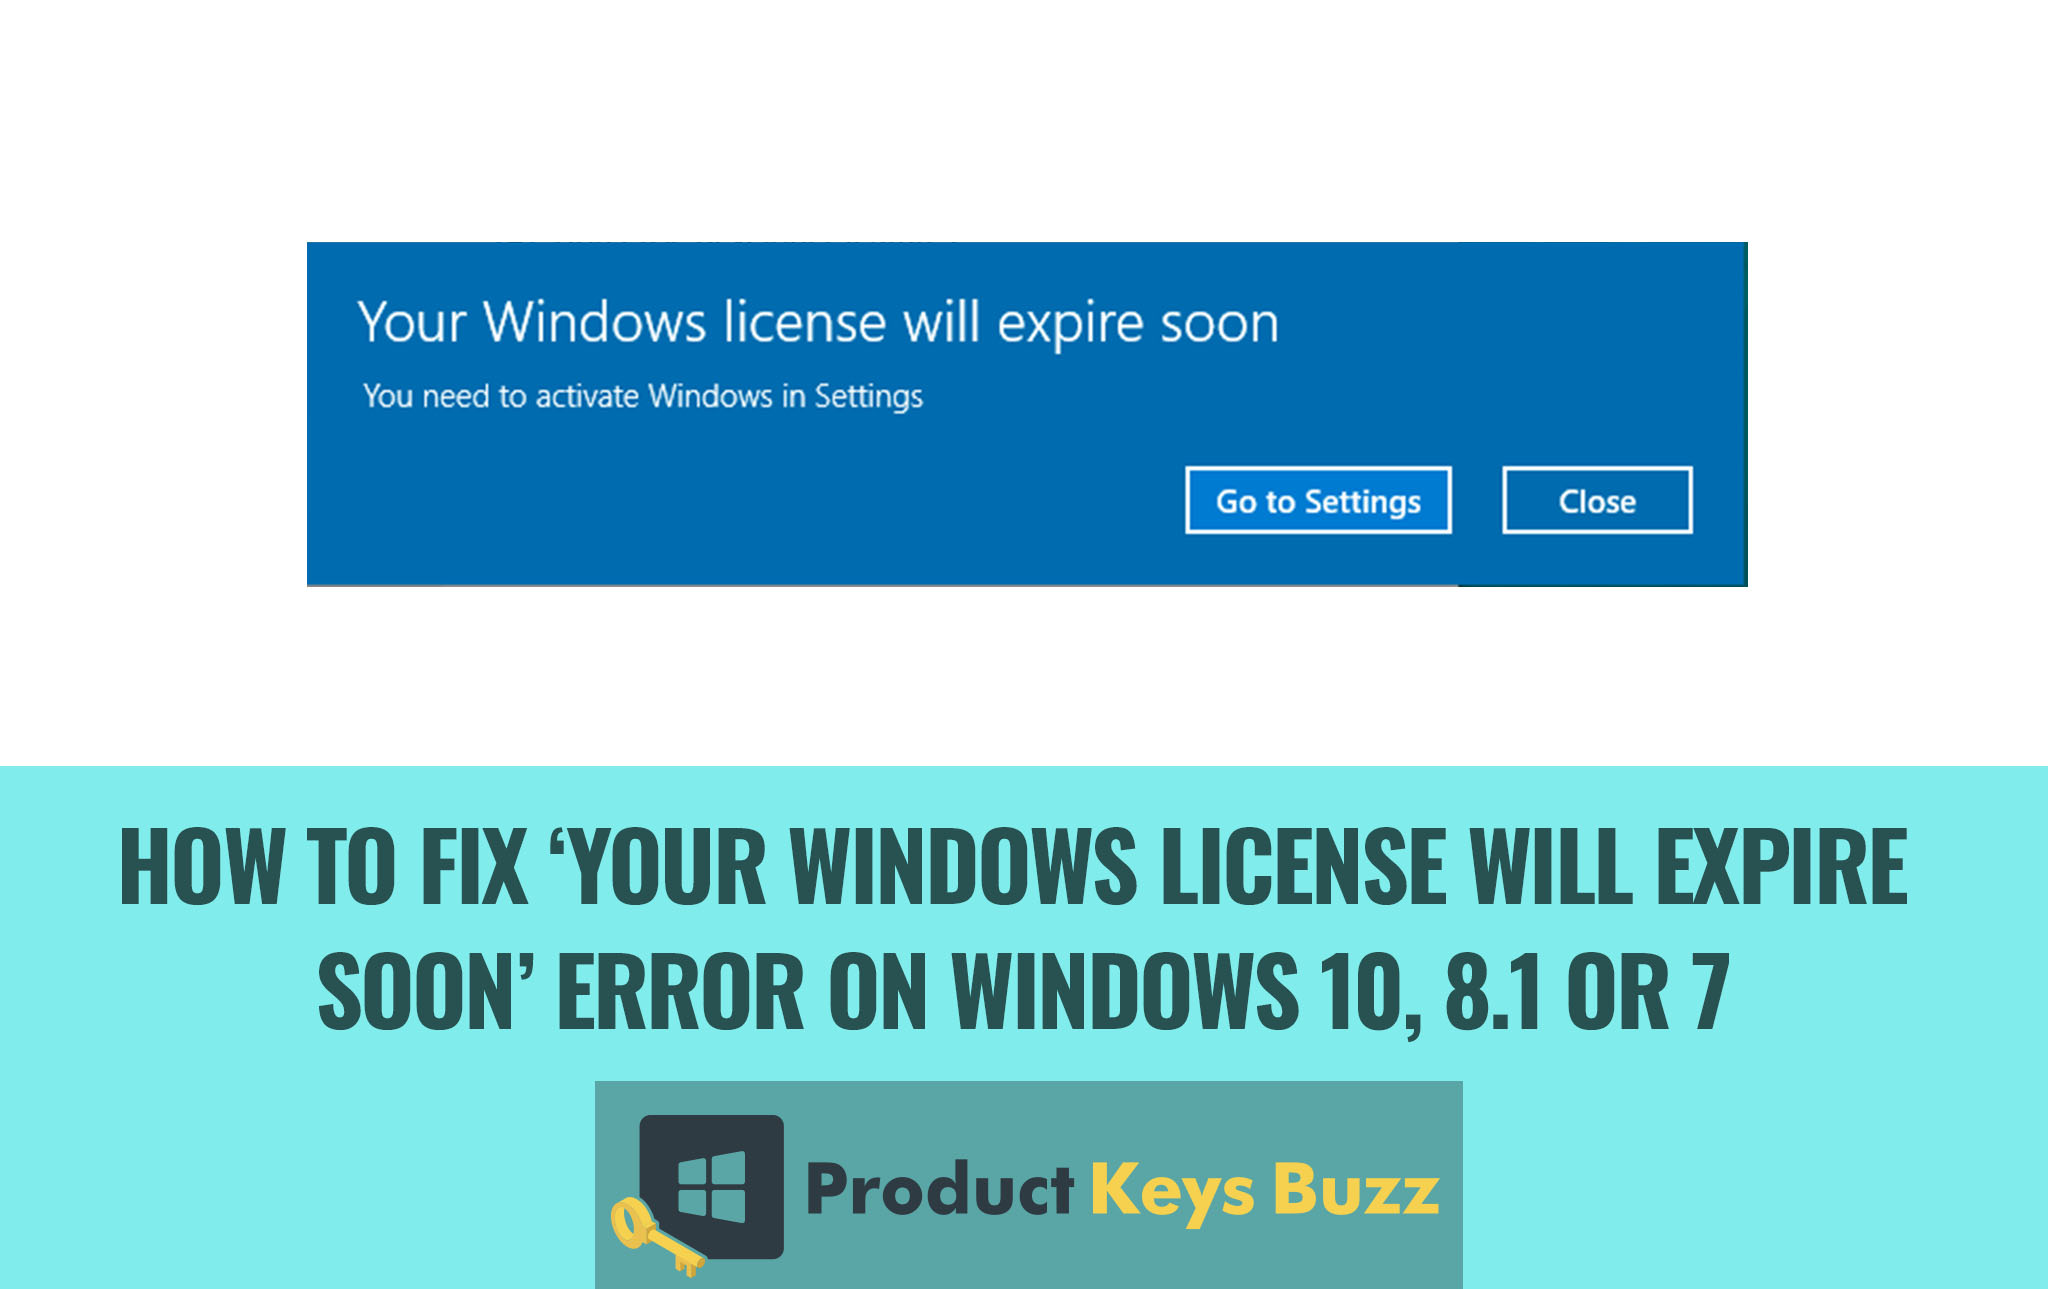 How to Fix ‘Your Windows License Will Expire Soon’ Error on Windows 10, 8.1 or 7